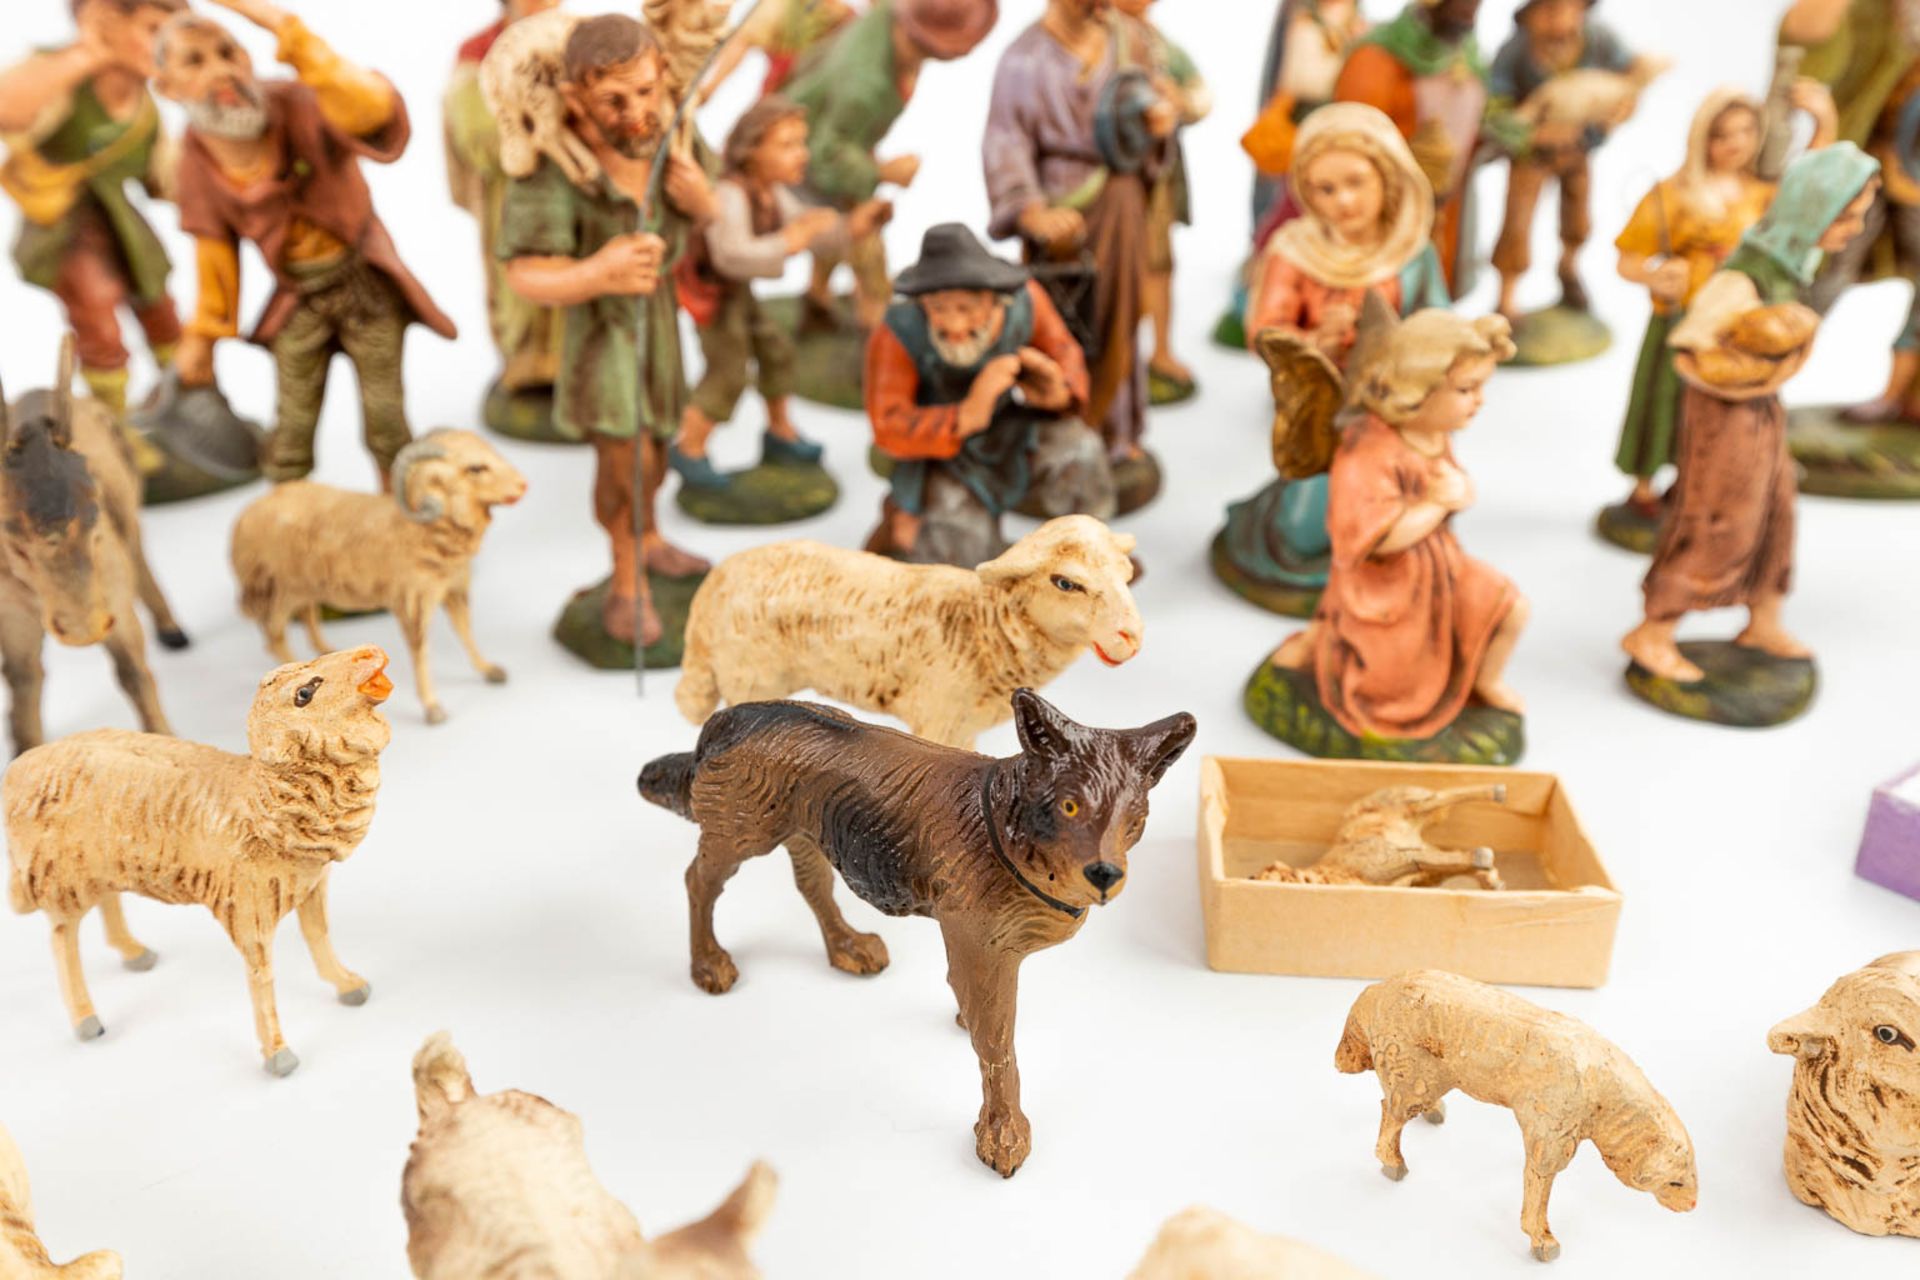 A large and extended Nativity scene with figurines and animals made of papier maché. - Image 6 of 20